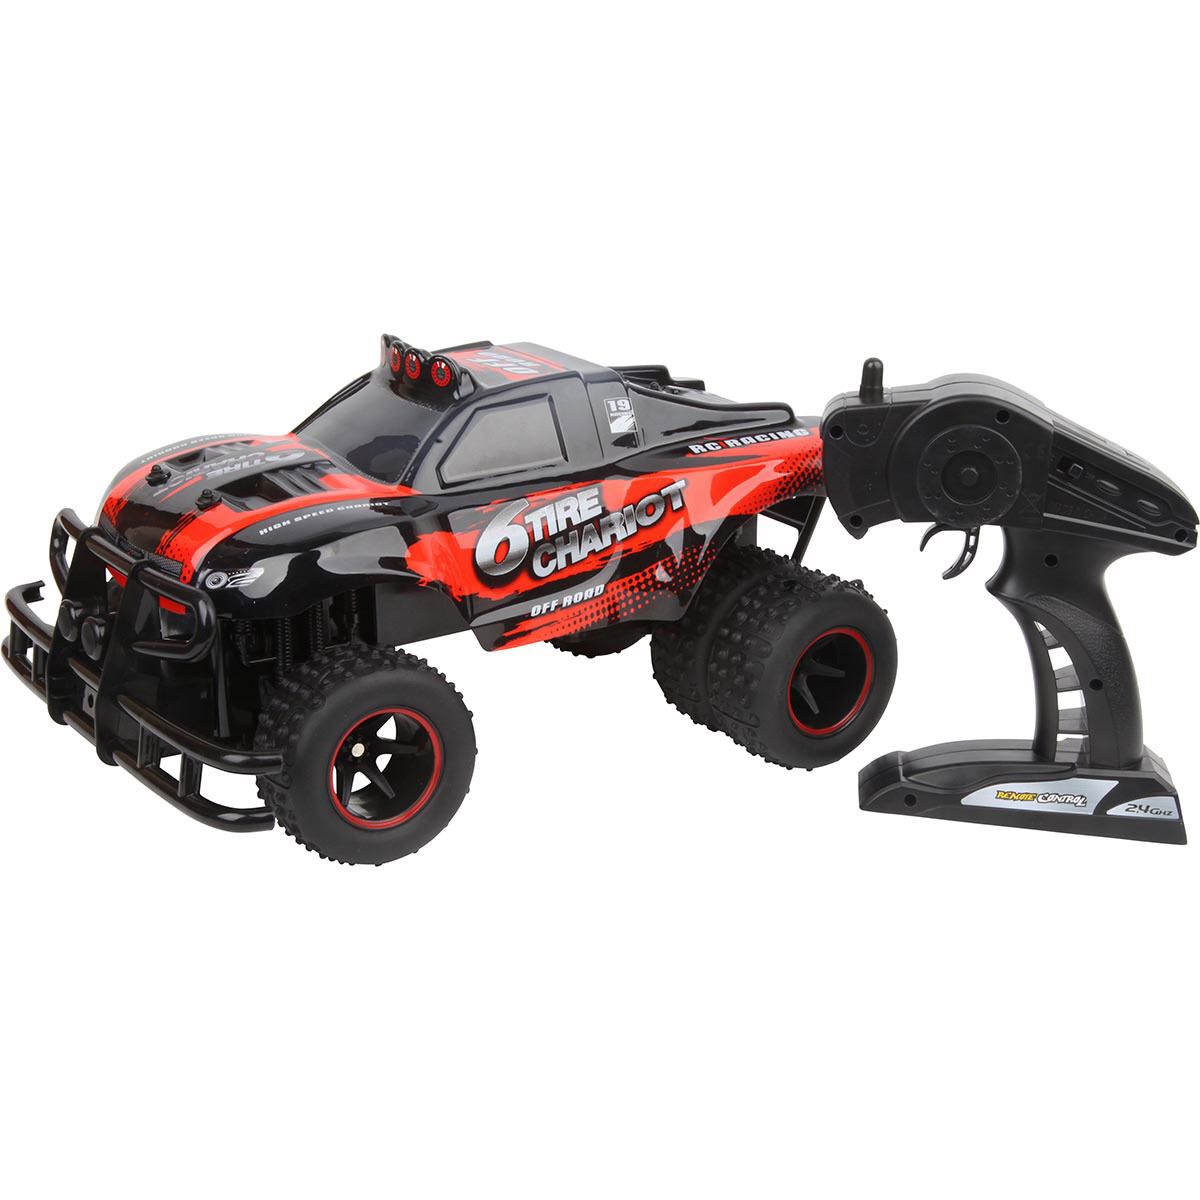 holden remote control cars